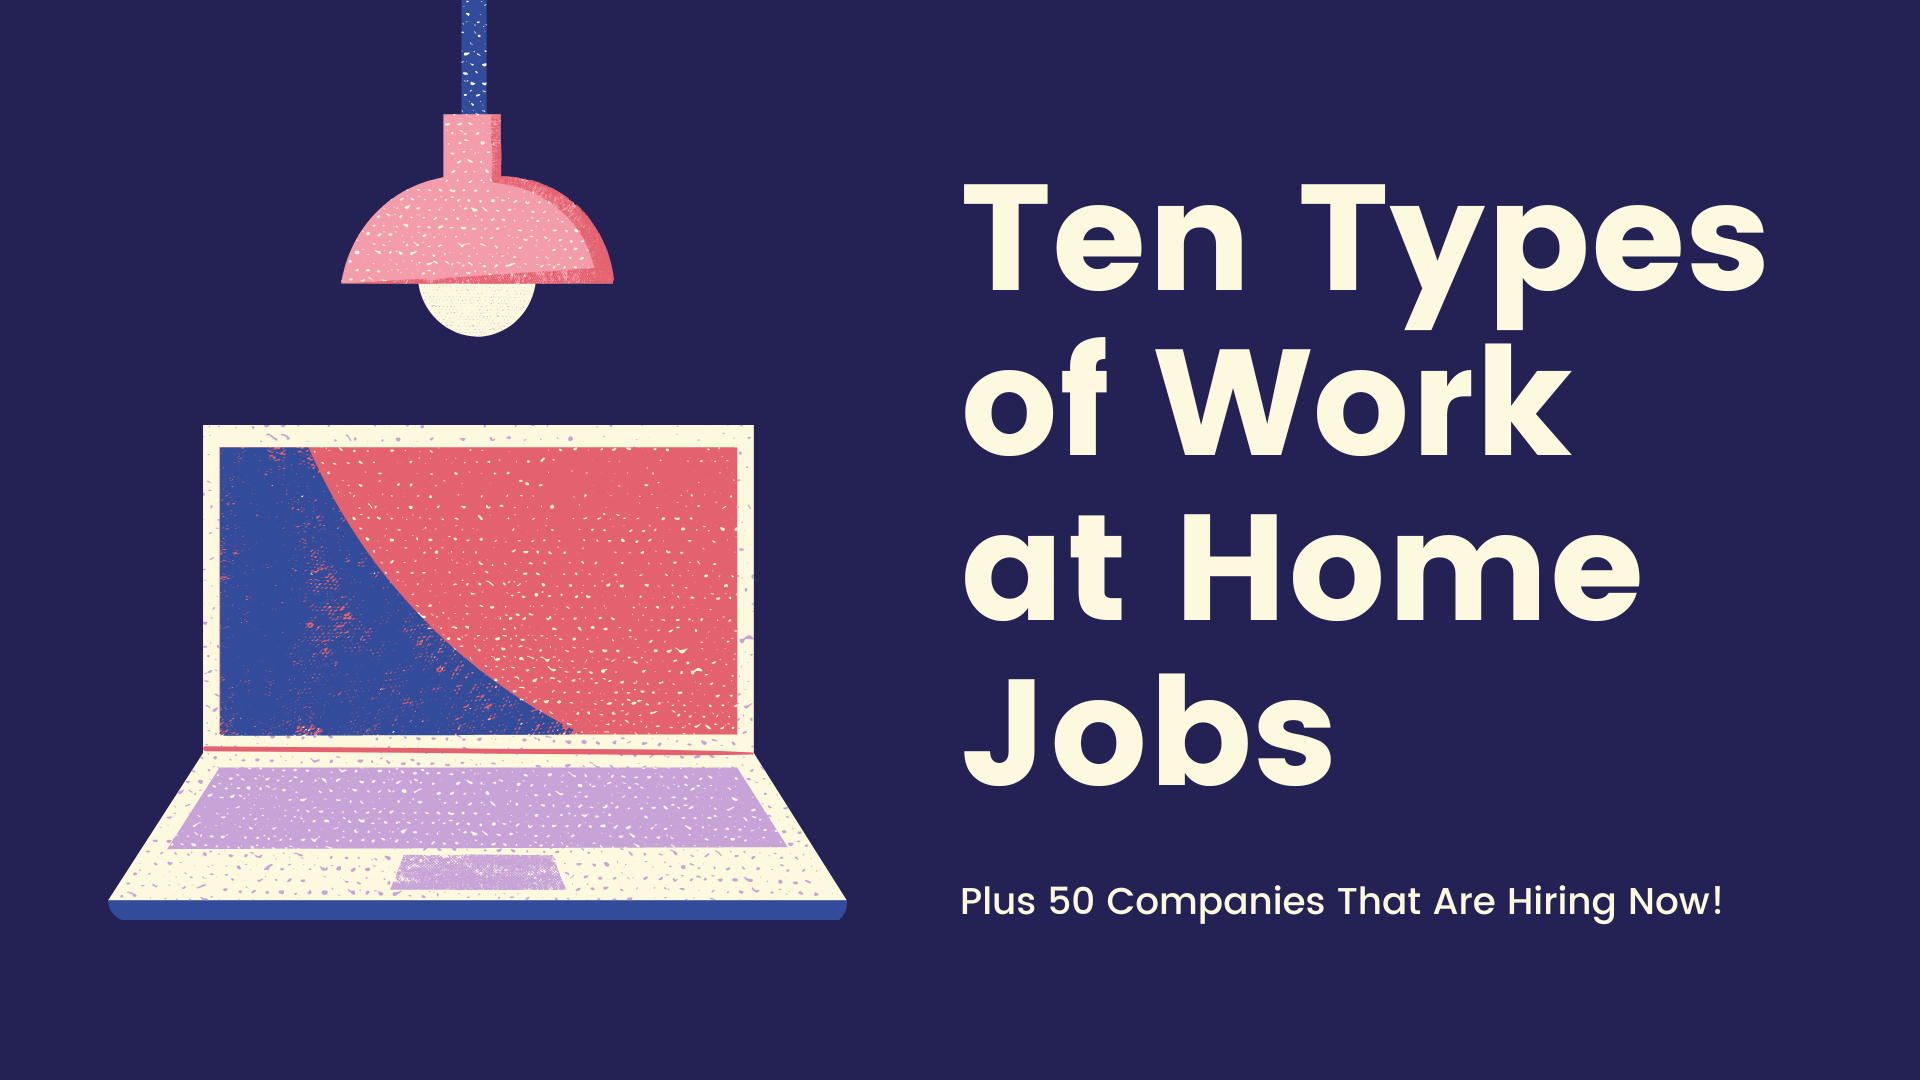 Ten types of work at home jobs